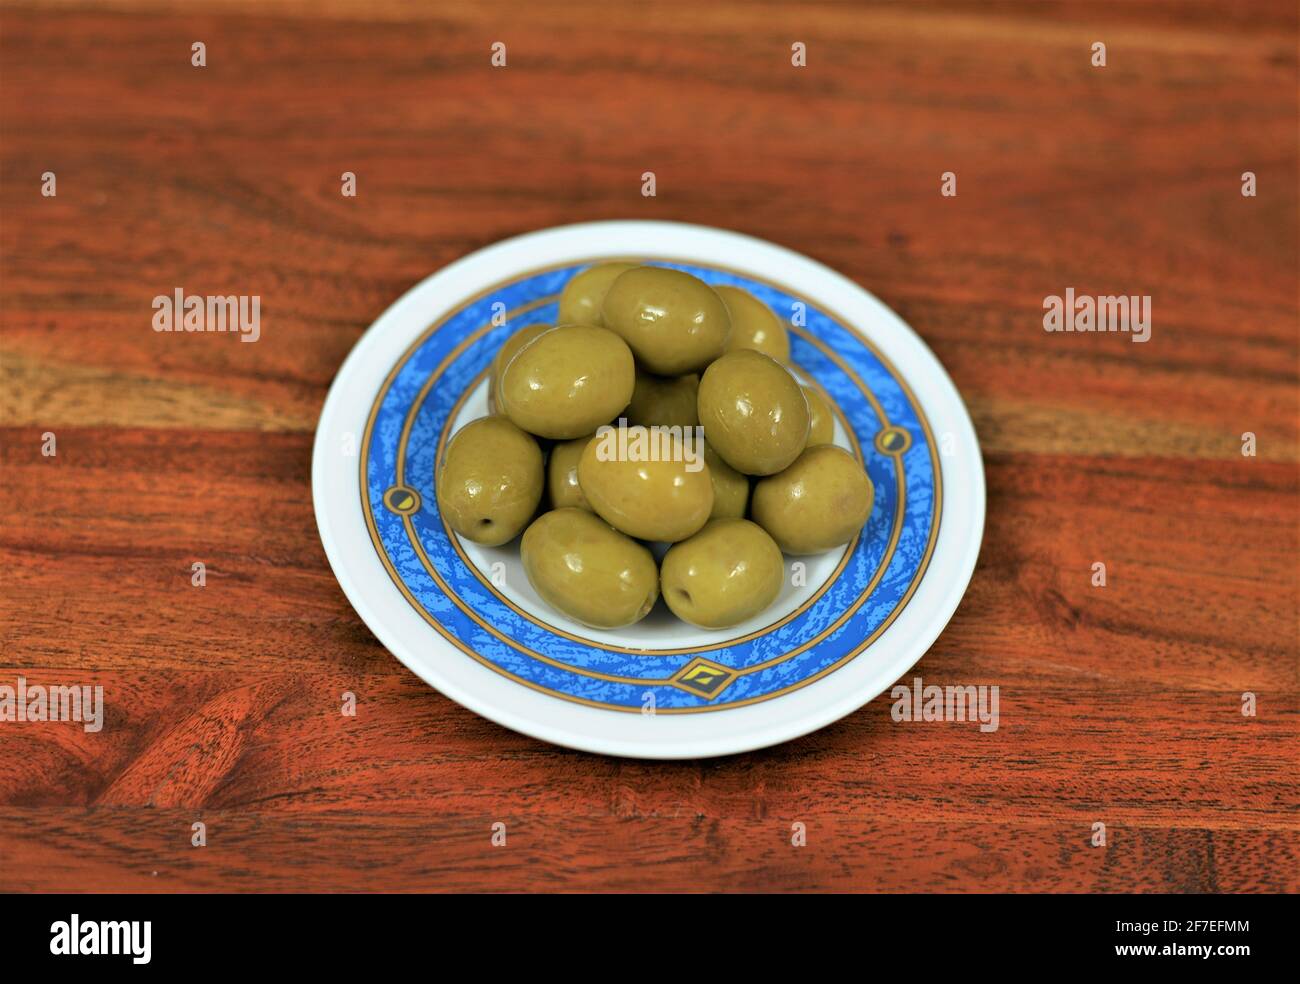 Andalucian green olives on a plate on a wooden table Stock Photo